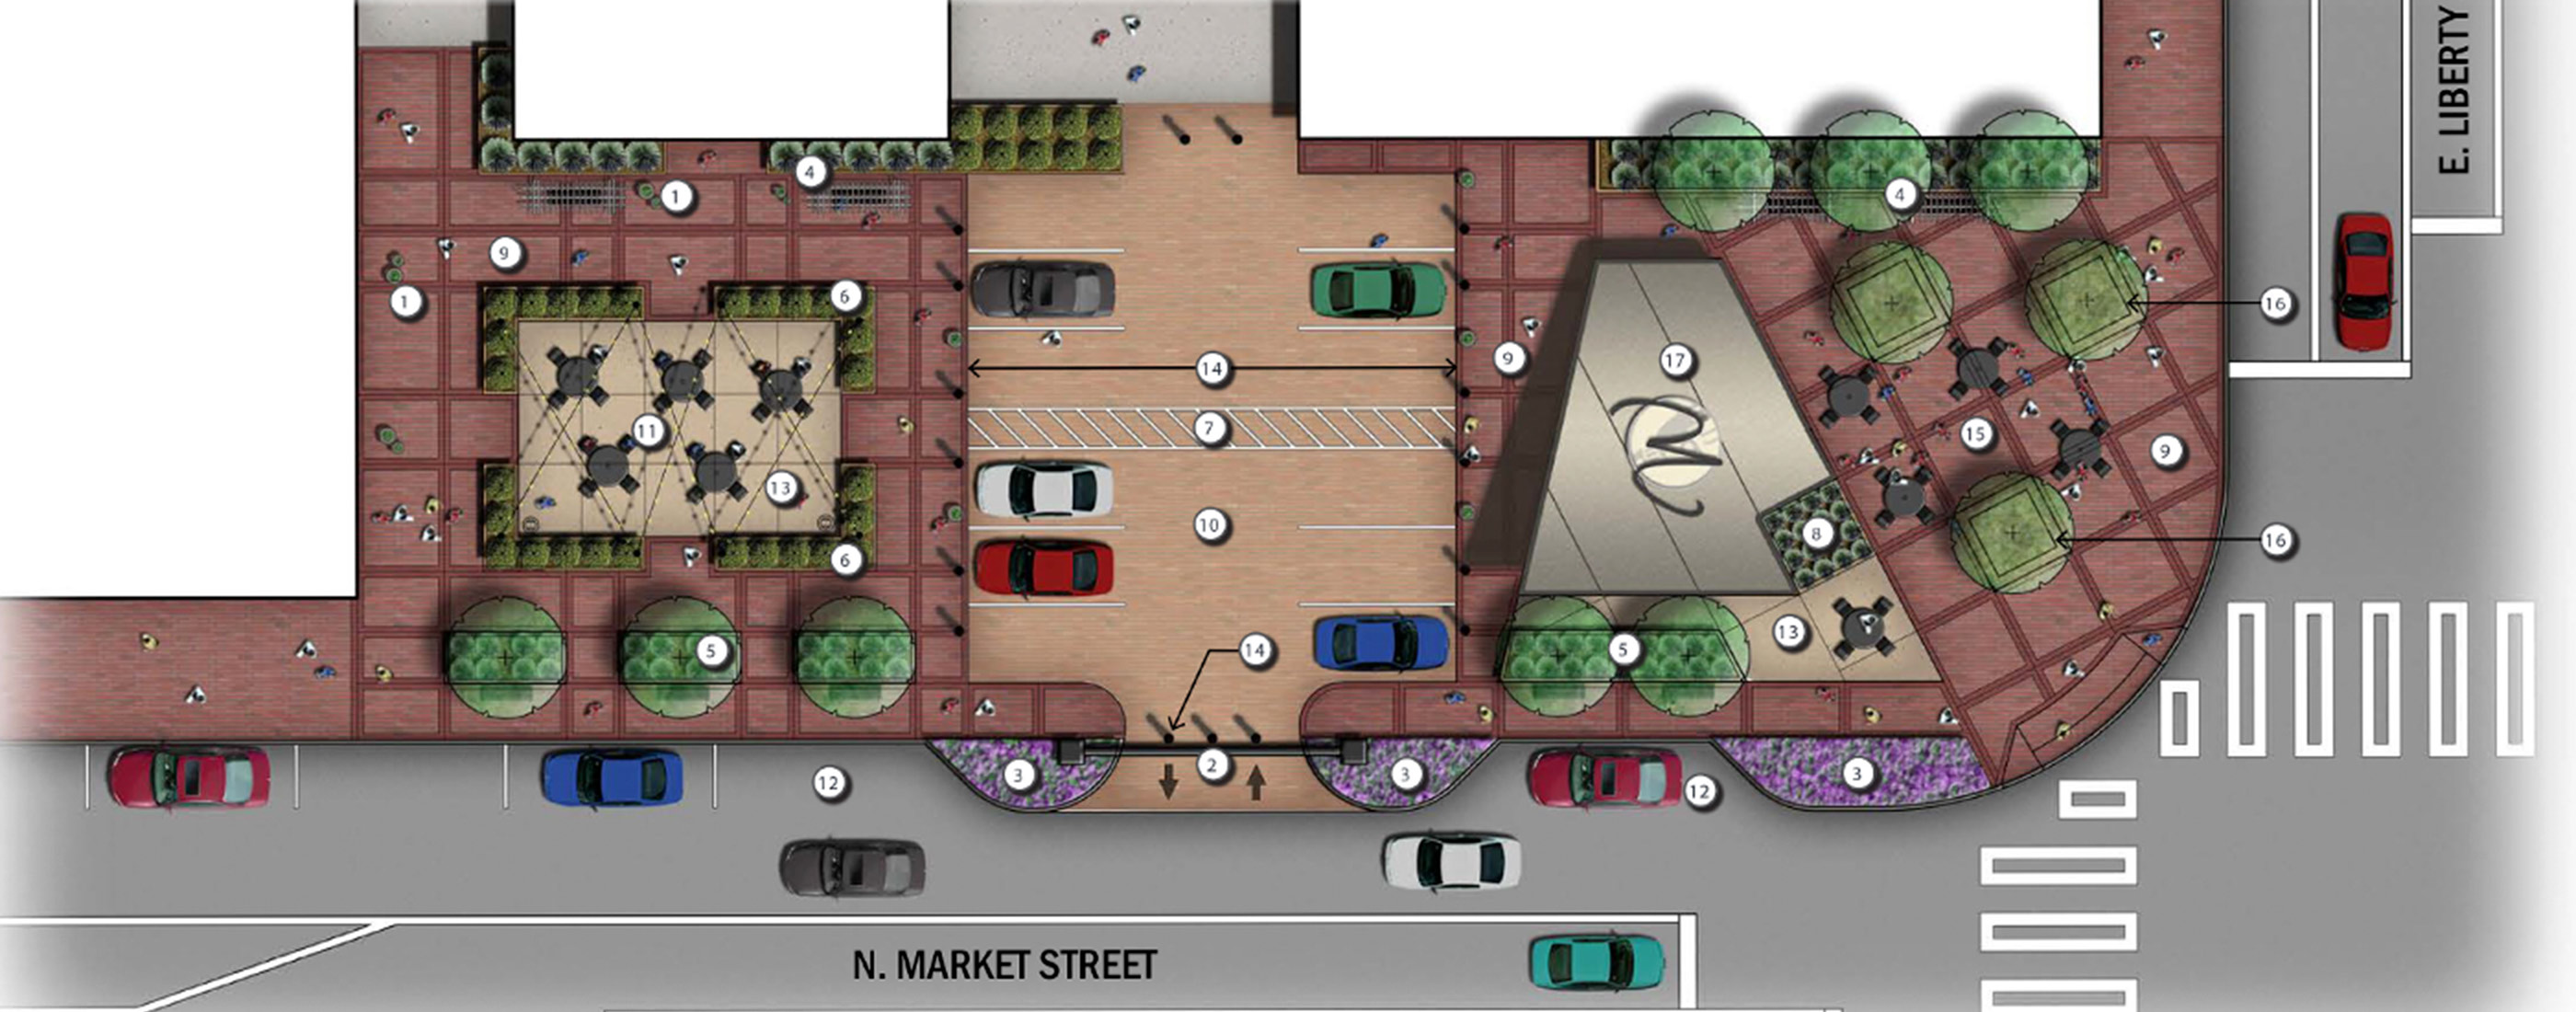 A rendering of Downtown Wooster, Ohio's N. Market Street streetscape improvements.